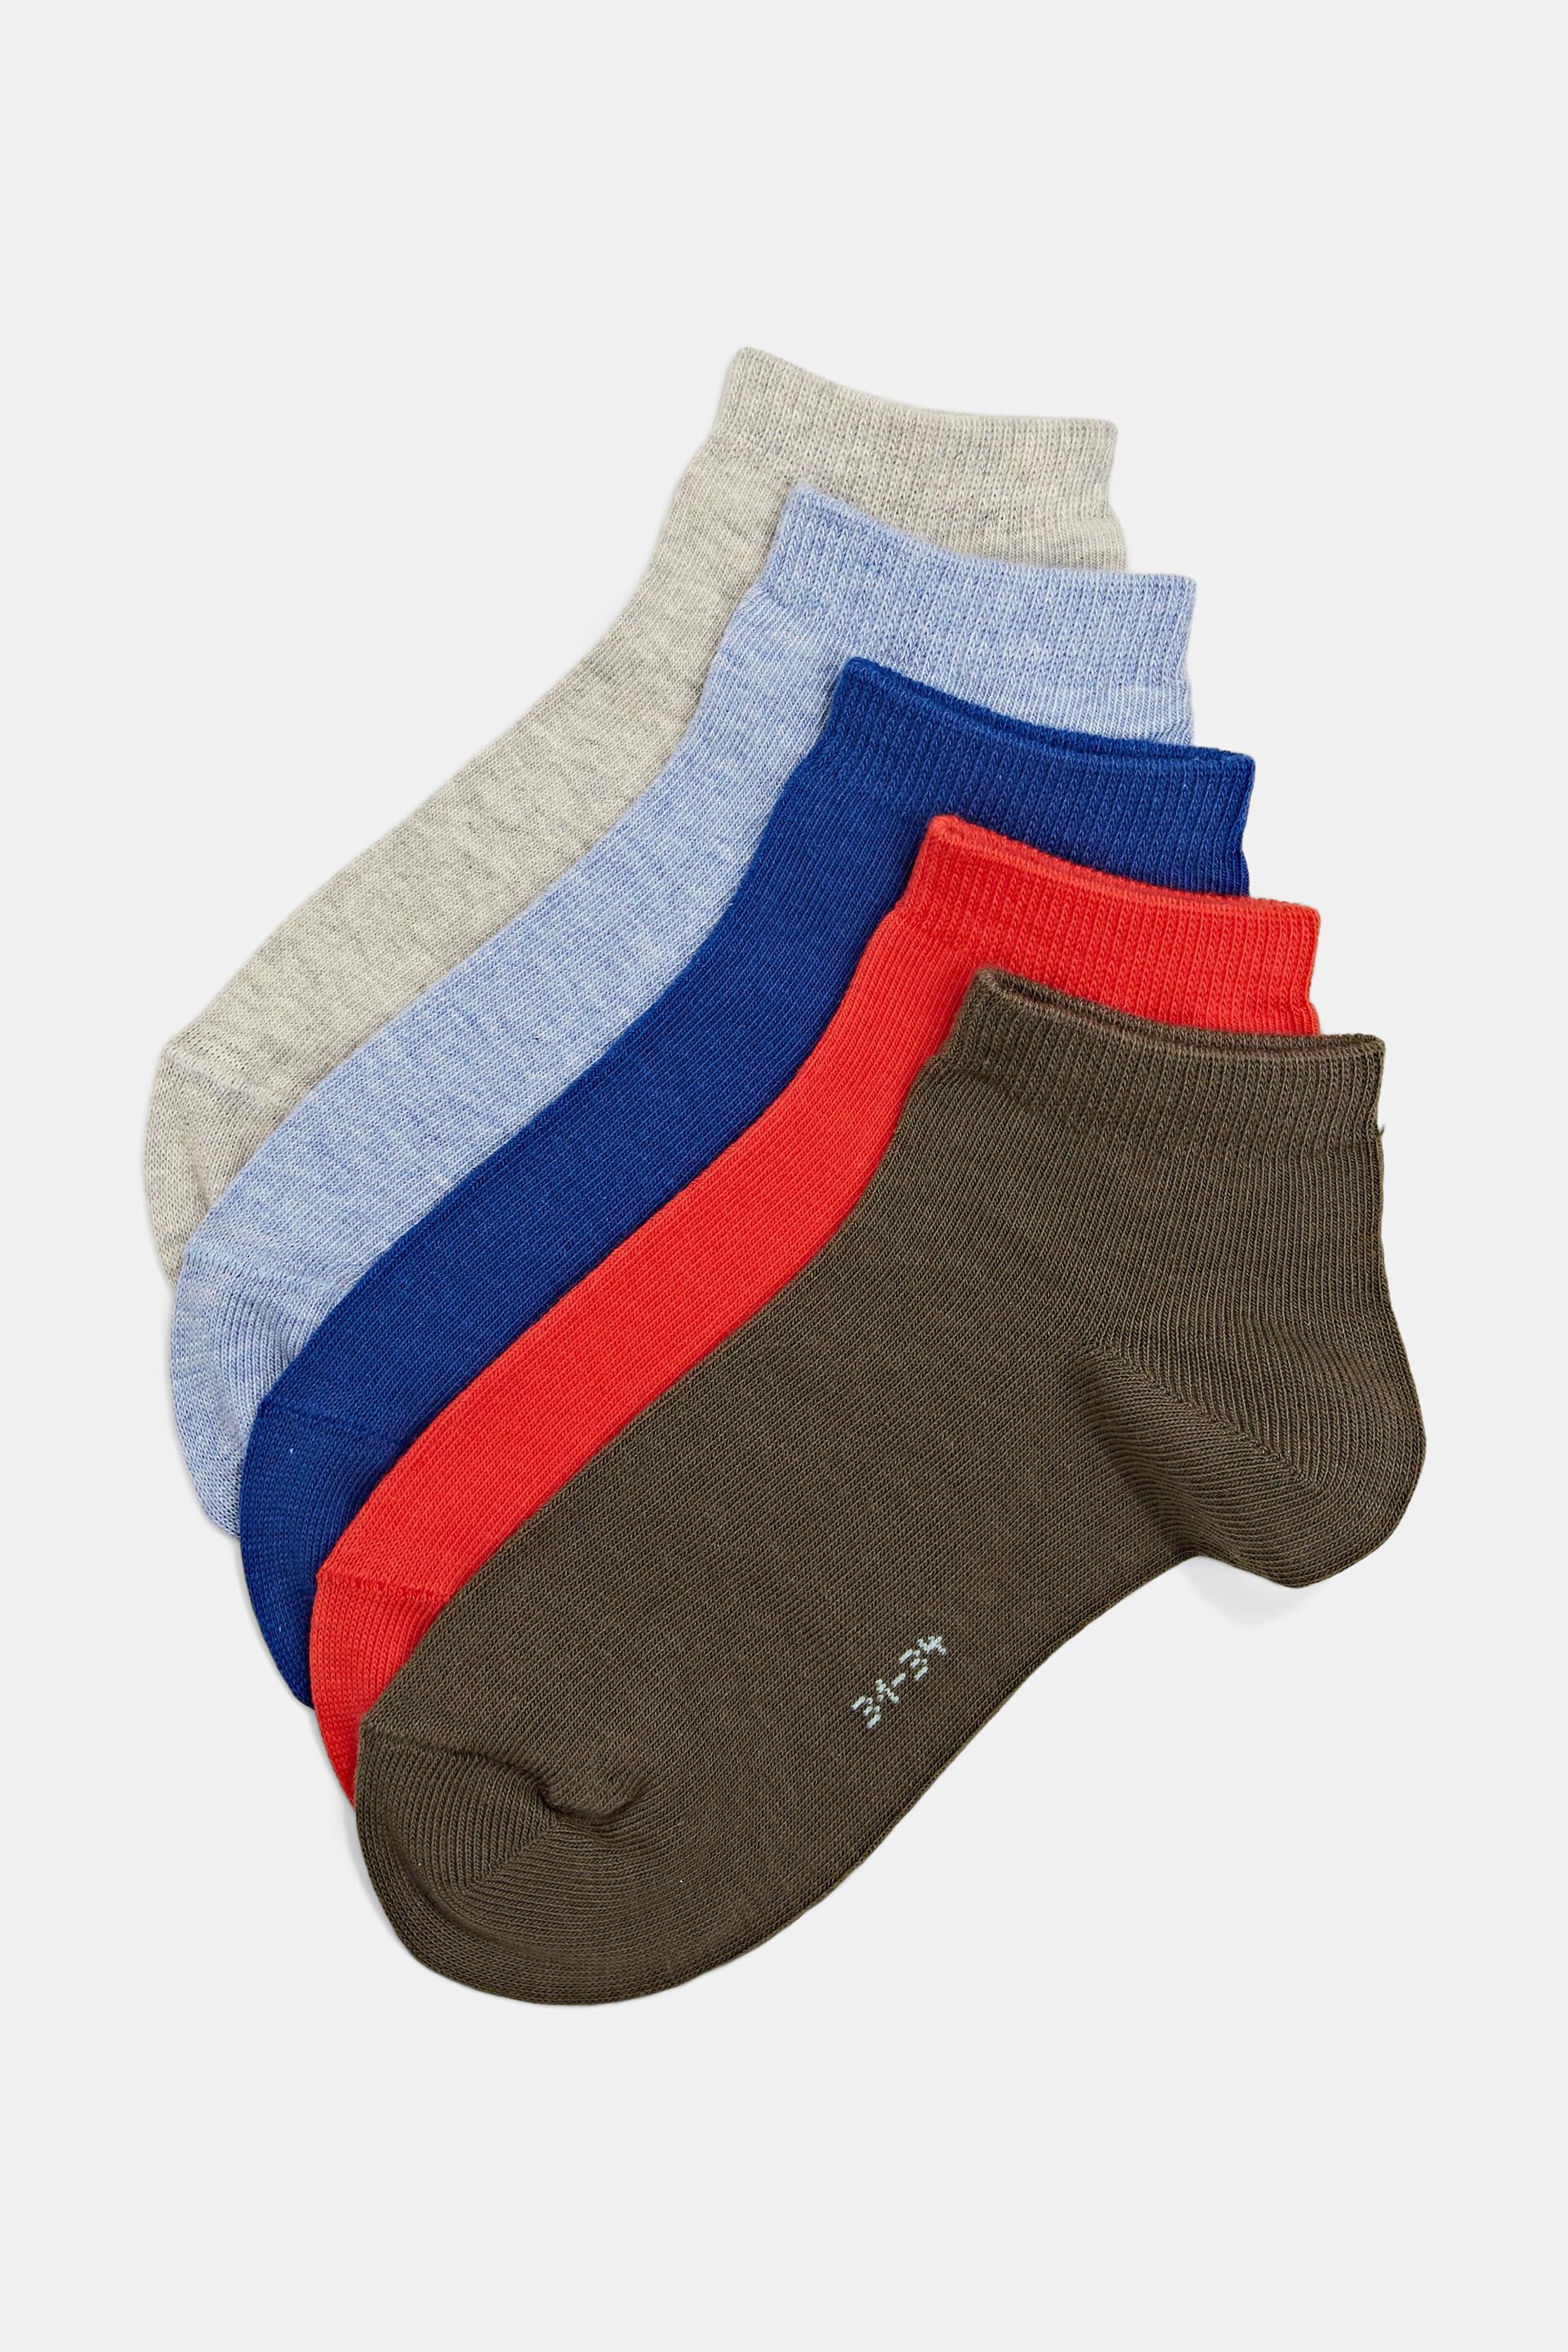 Esprit Outlet Pack of 5 pairs of plain-coloured socks, in an organic cotton blend